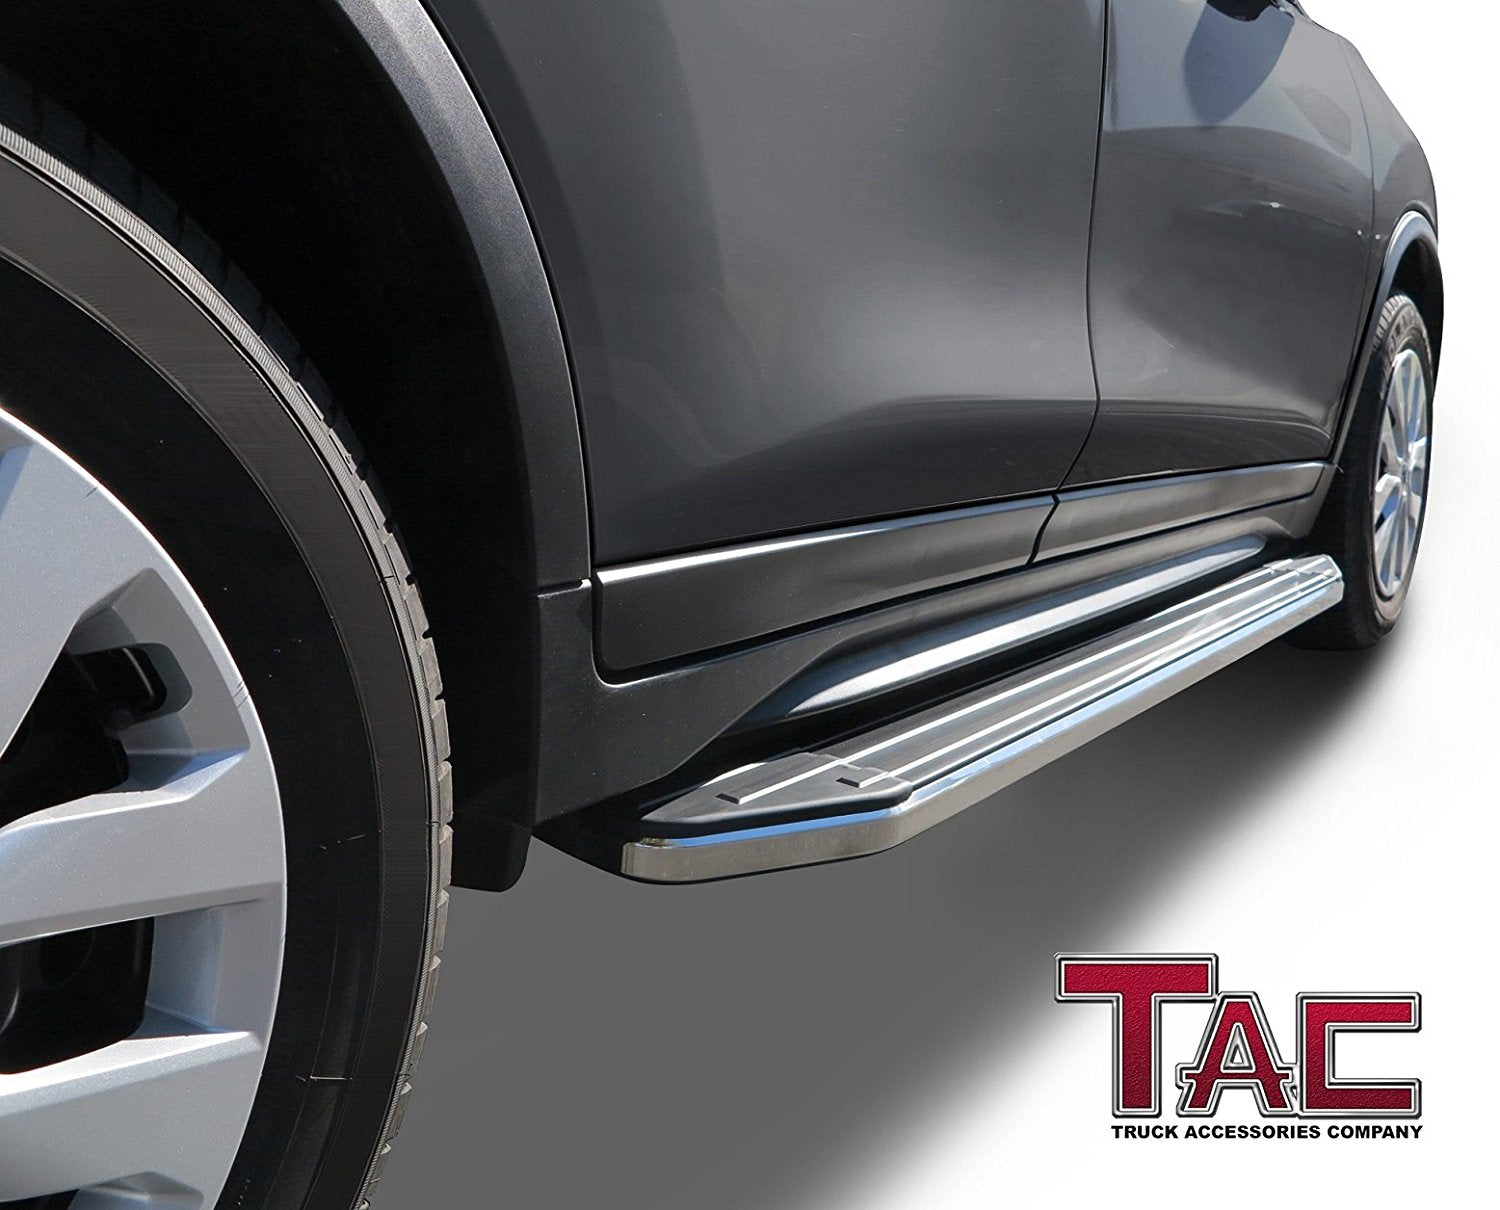 TAC ViewPoint Running Boards Fit 2006-2018 Toyota RAV4 SUV | Side Steps | Nerf Bars | Side Bars - 0